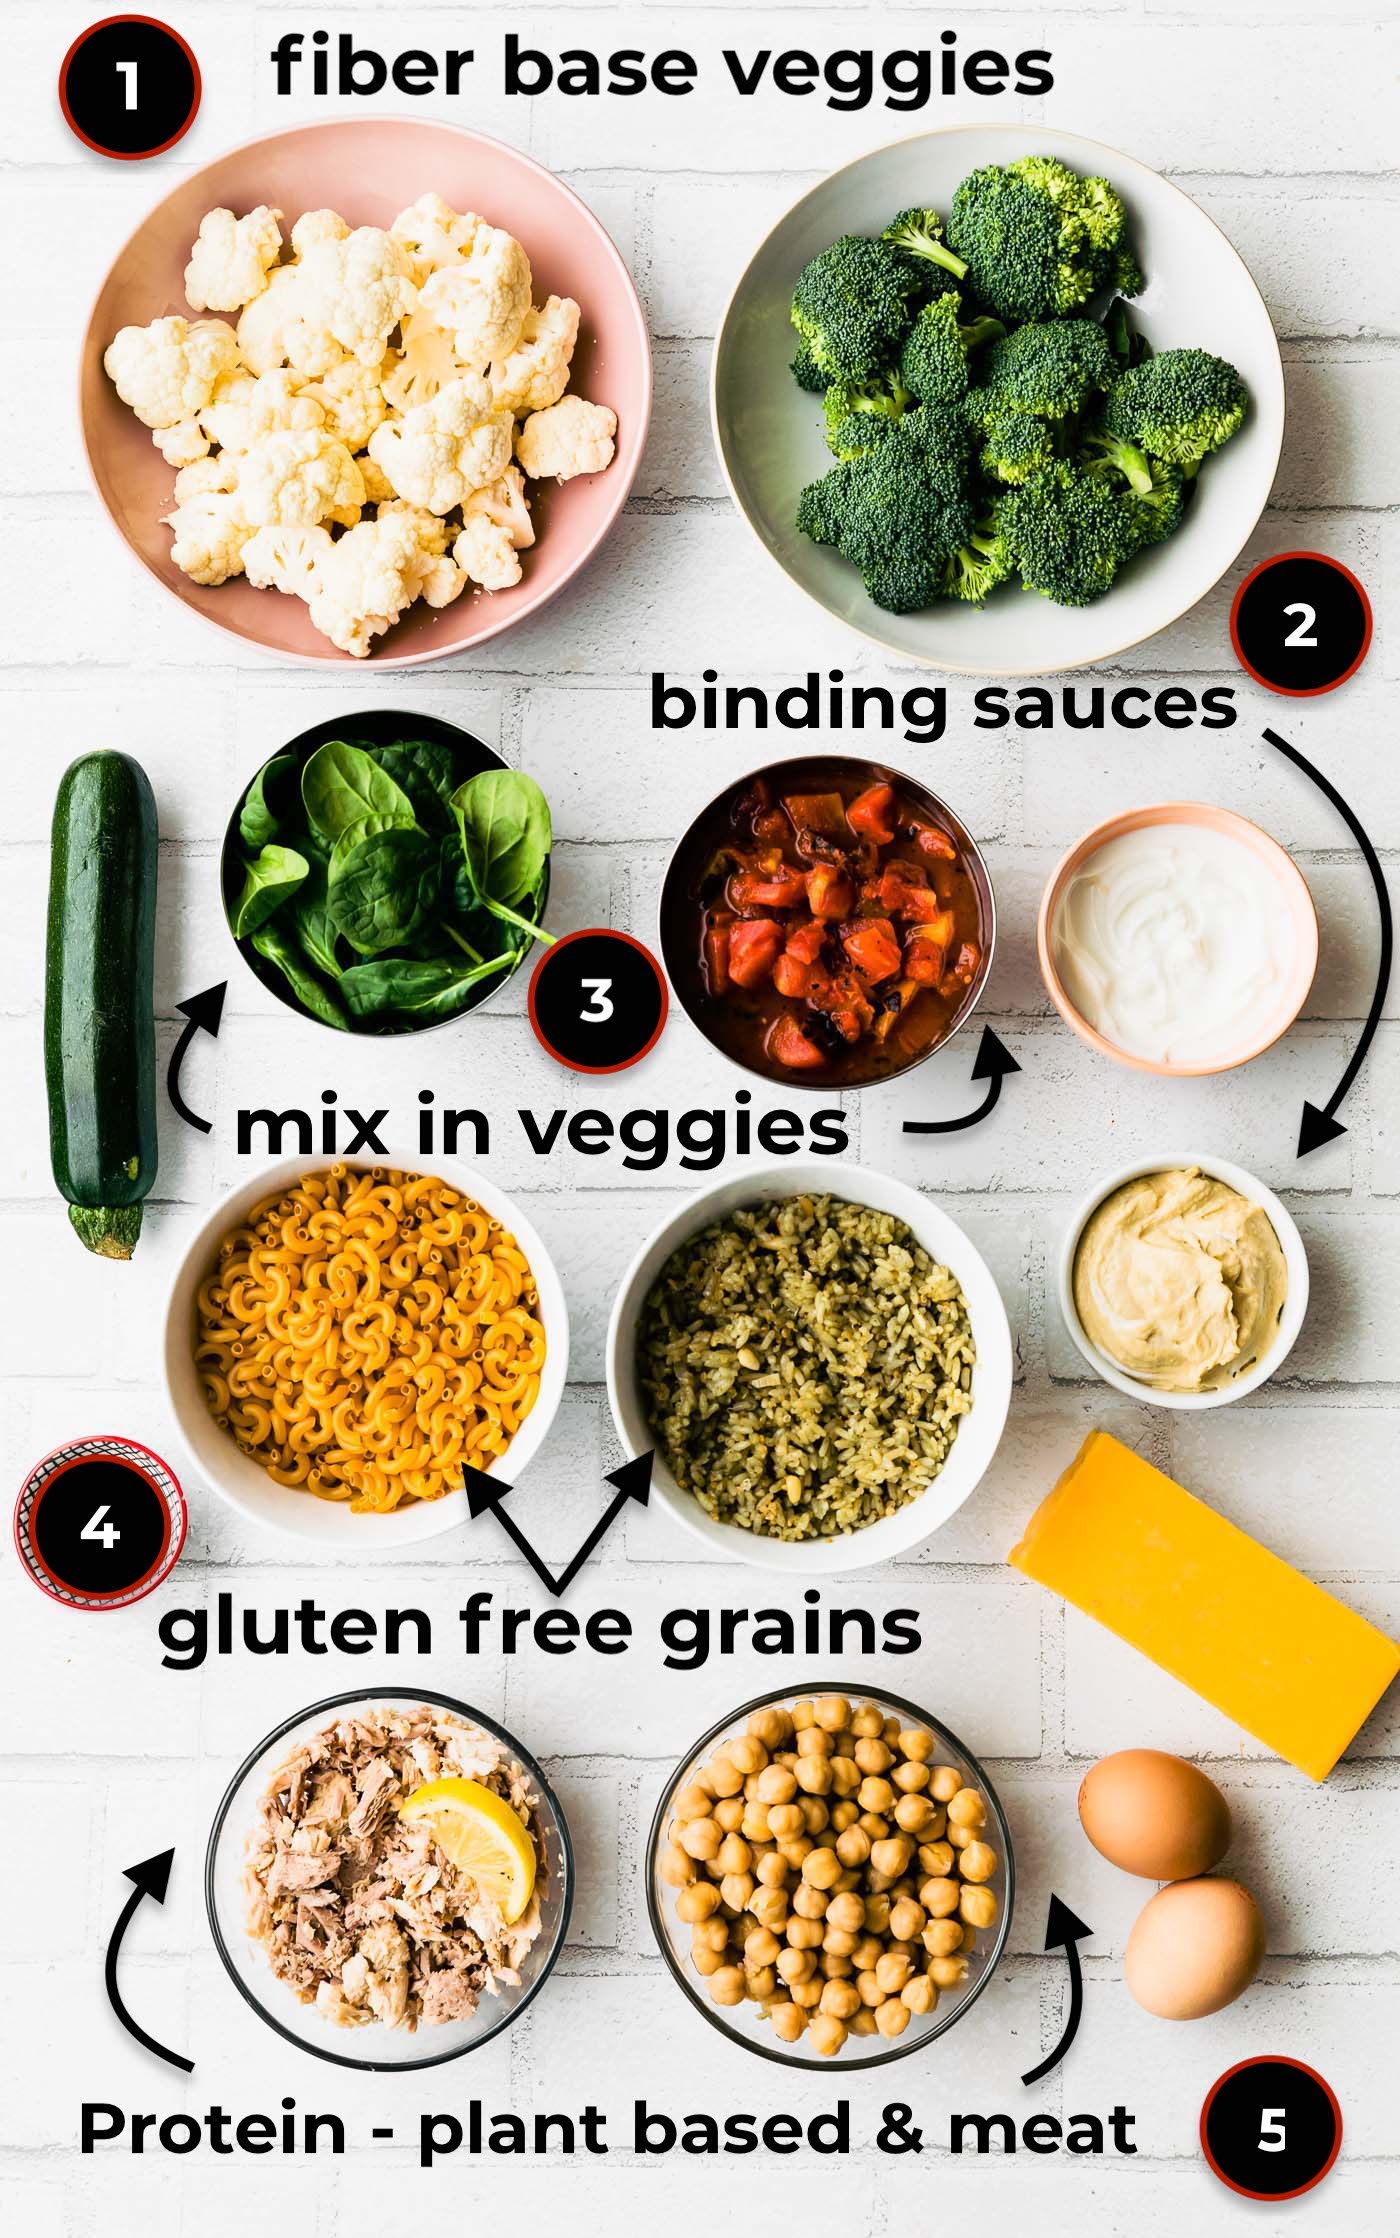 Cheap meal ingredients